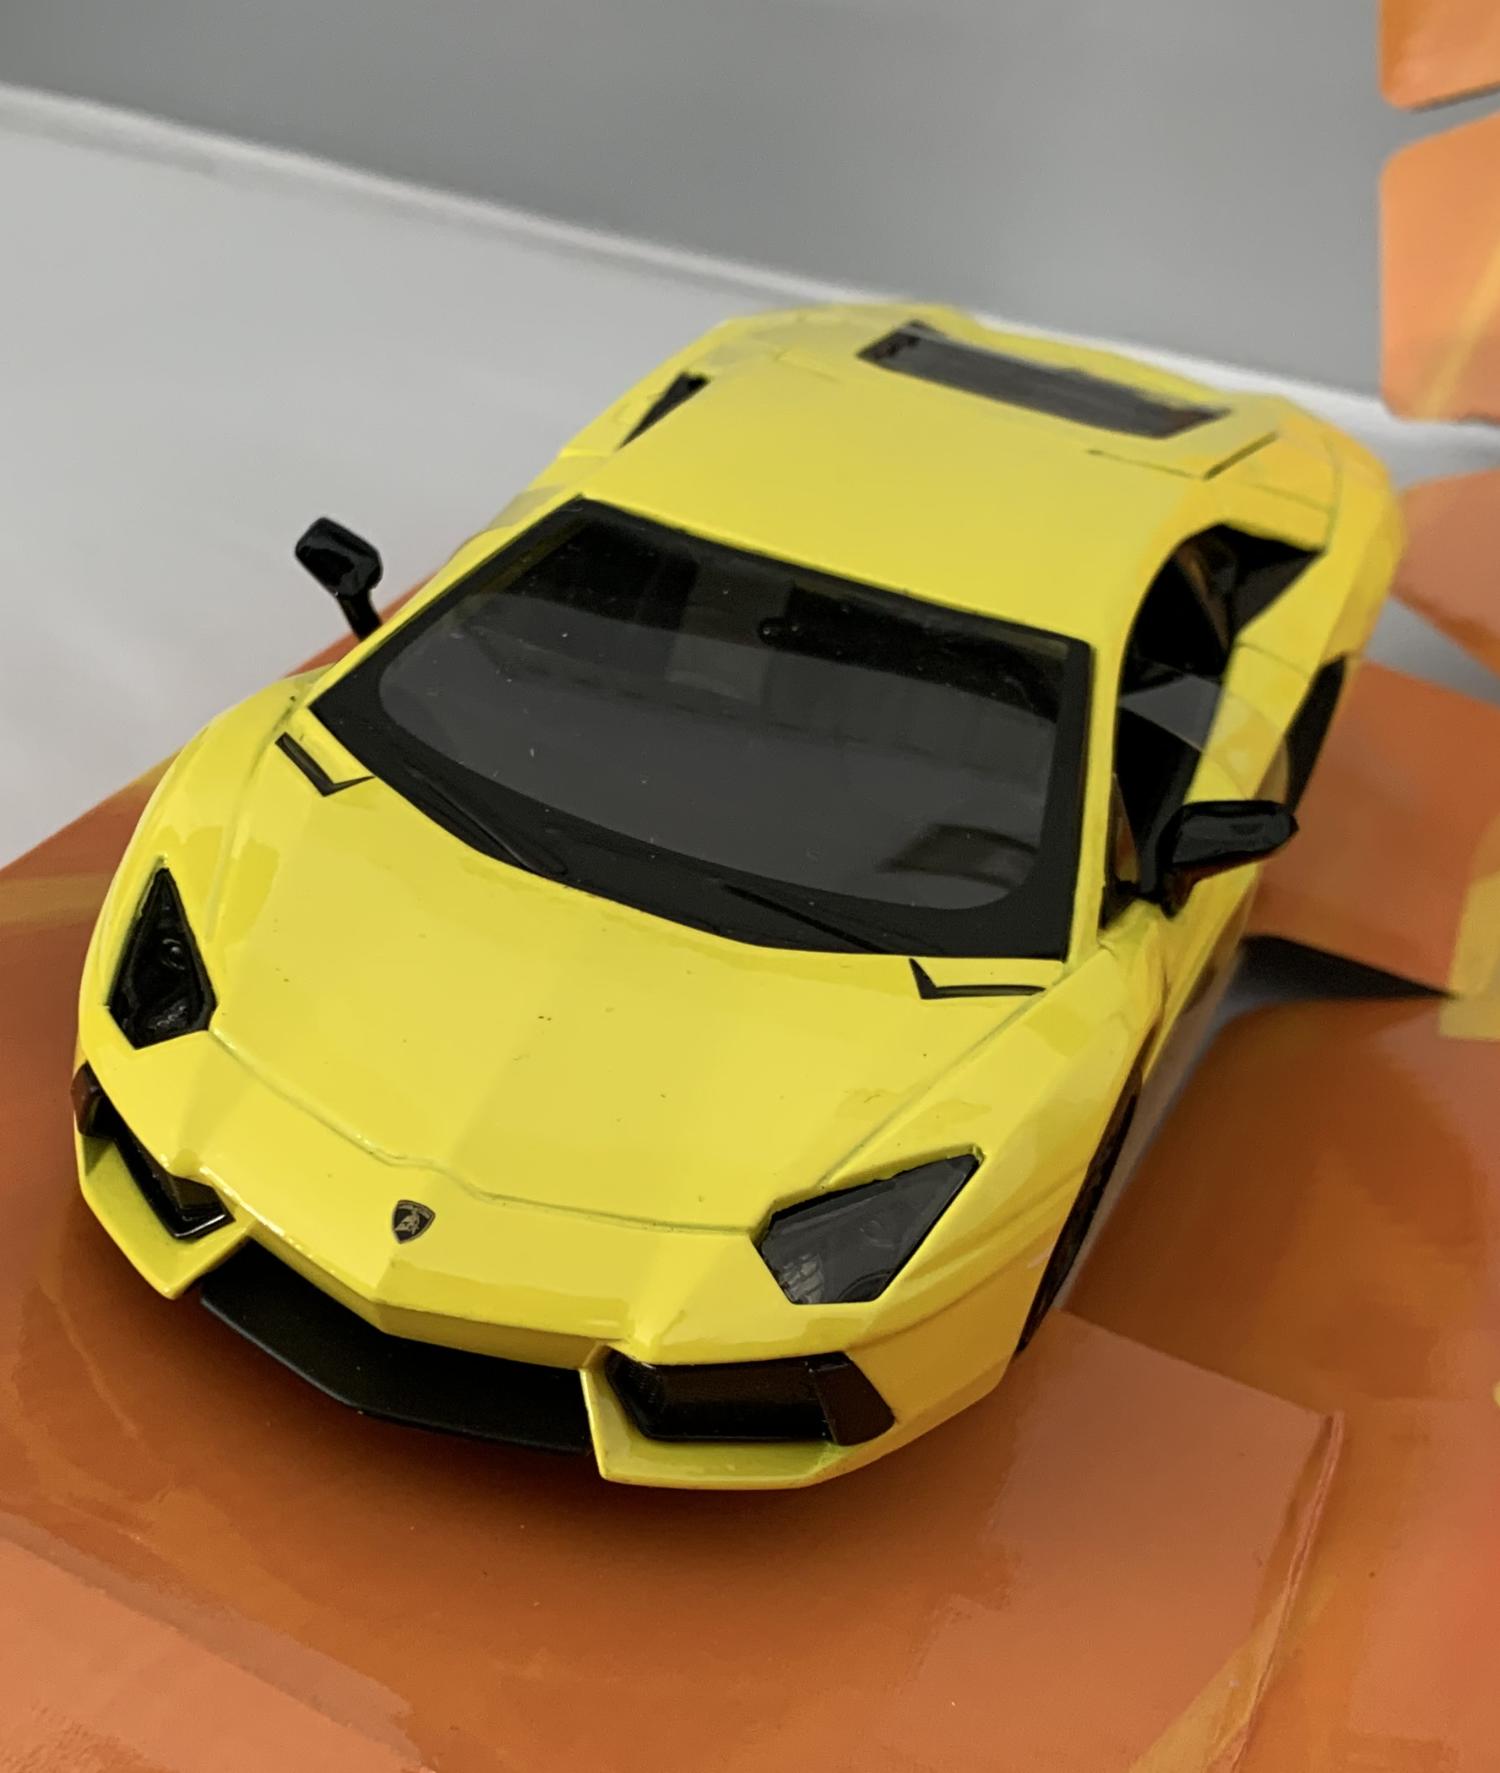 An excellent scale model of a Lamborghini Aventador LP 700-4 decorated in yellow with black wheels.   Features opening driver and passenger doors, opening rear to reveal detailed engine